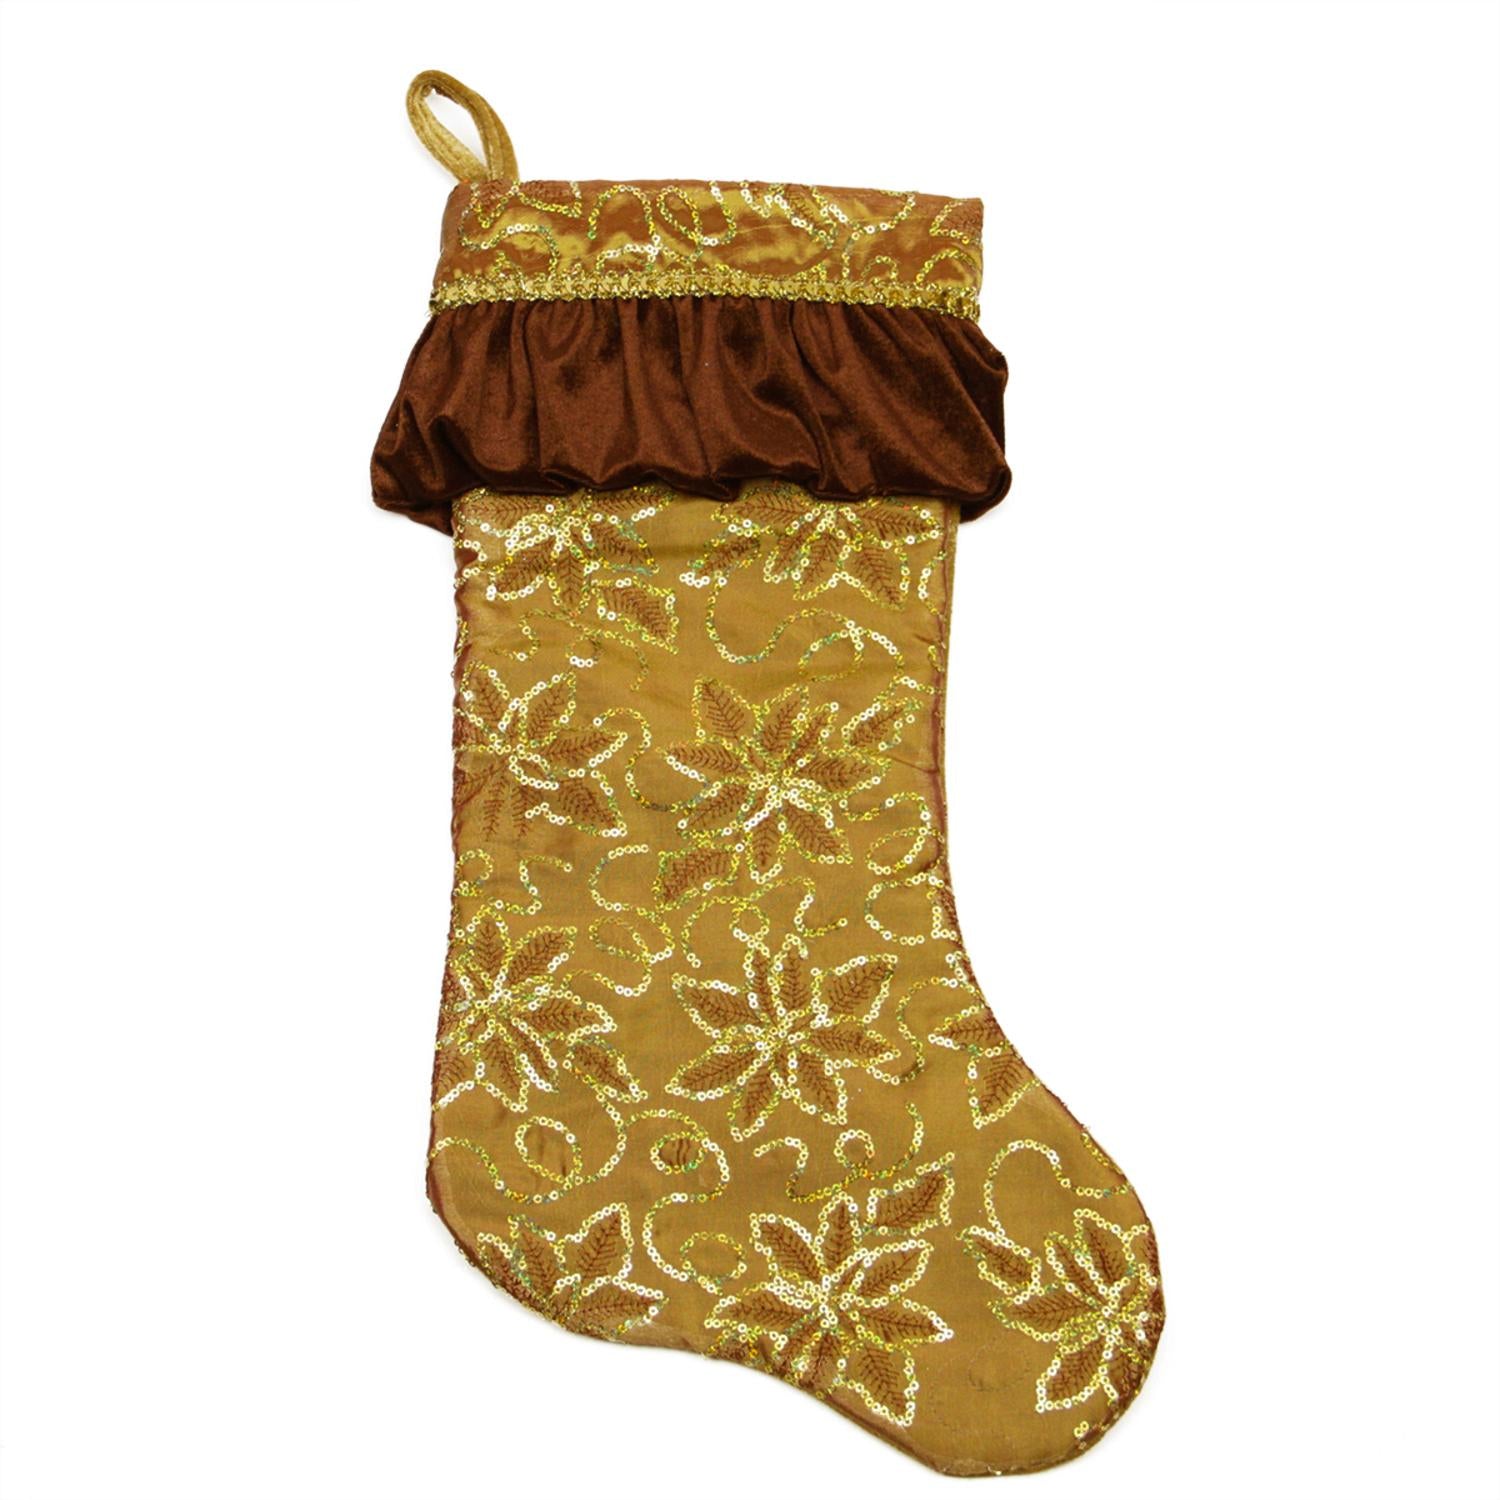 19" Gold Sequined Floral Christmas Stocking with Venetian-Style Ruffle Cuff